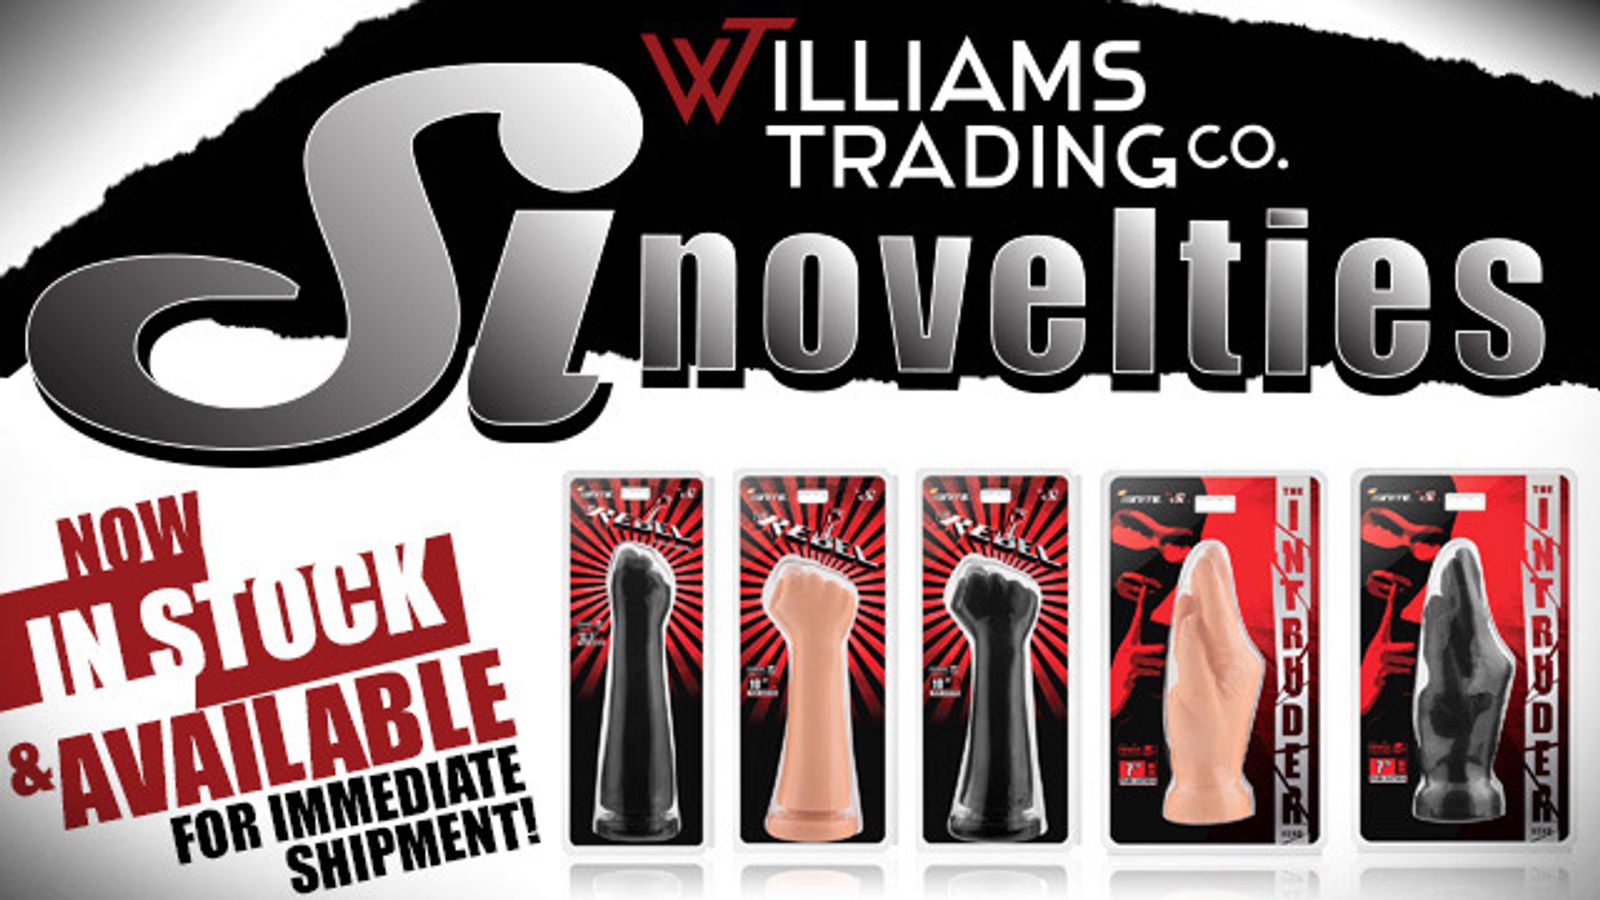 Williams Trading Announces SI Novelties Lines In Stock